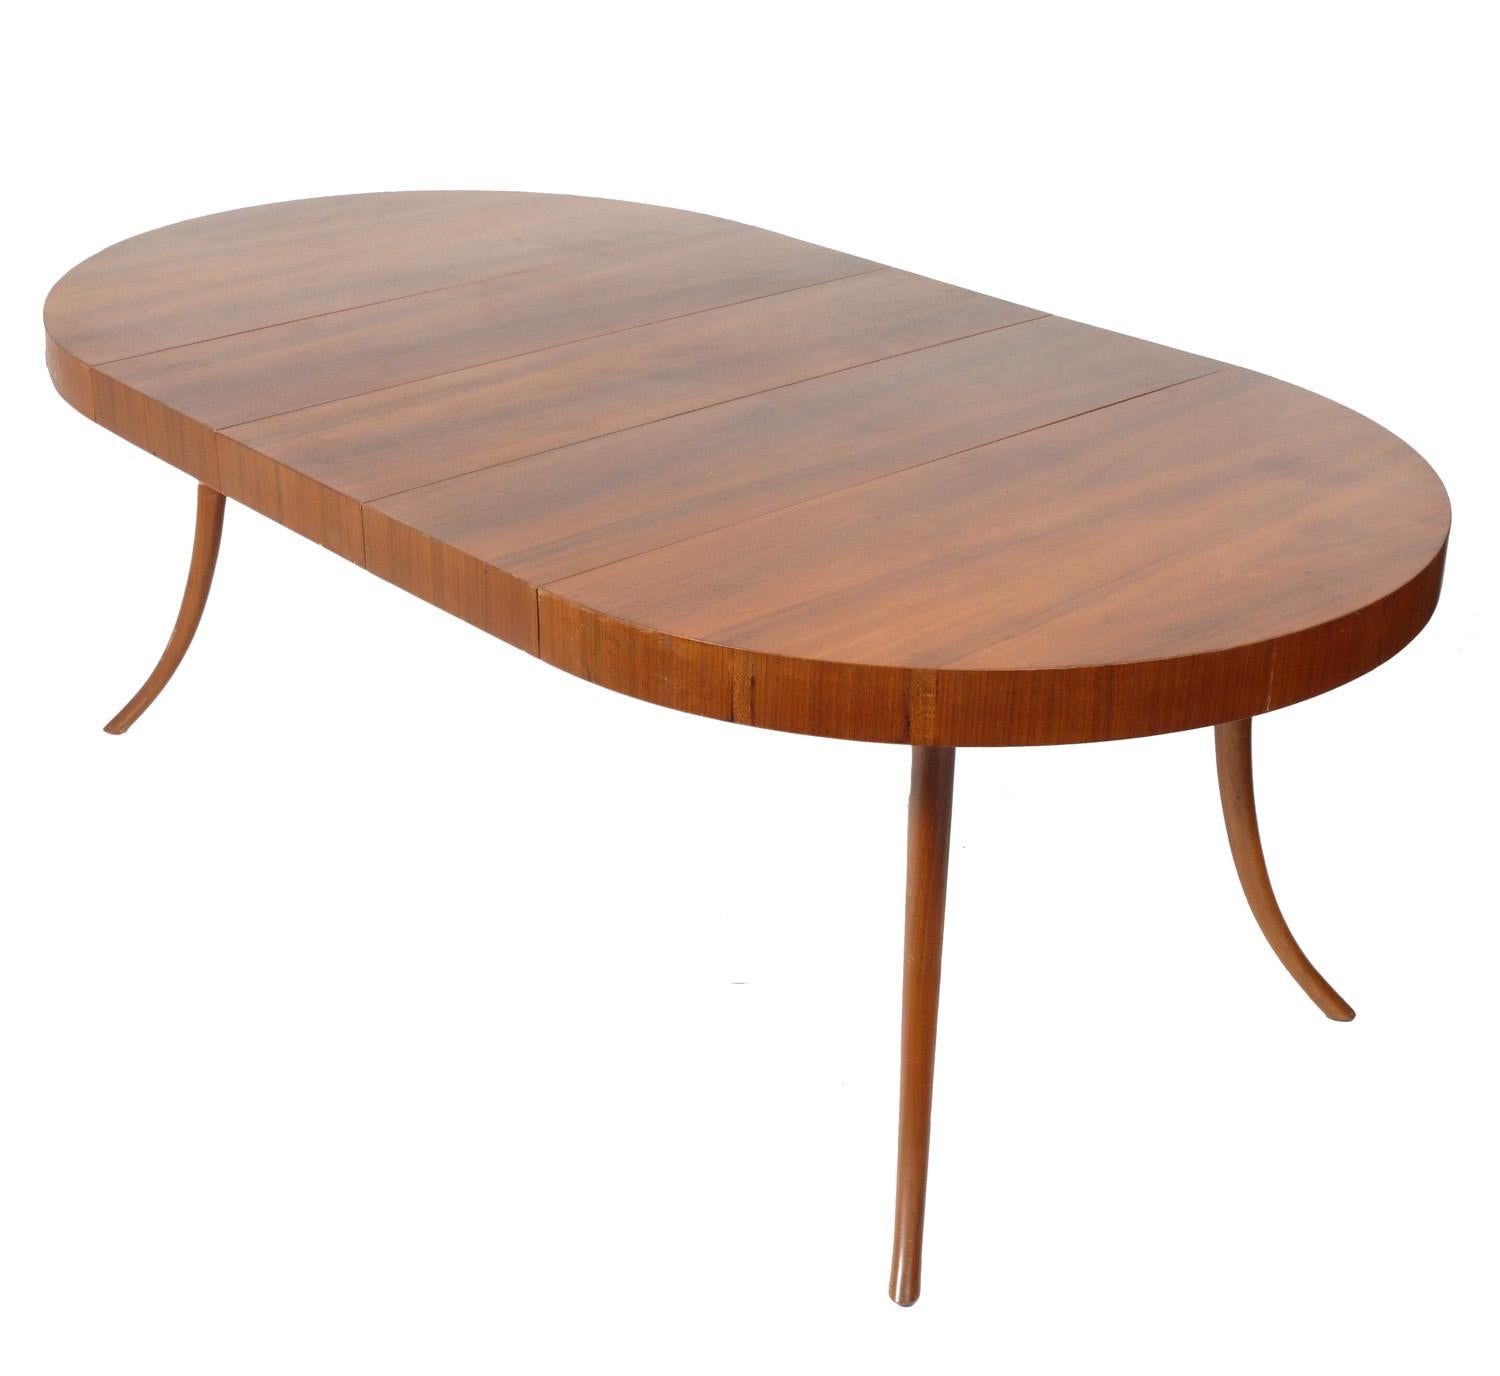 Elegant midcentury dining table, designed by T. H. Robsjohn-Gibbings for Widdicomb of Canada, circa 1950s. Clean lined design with elegant splayed legs. It expands from a compact 44